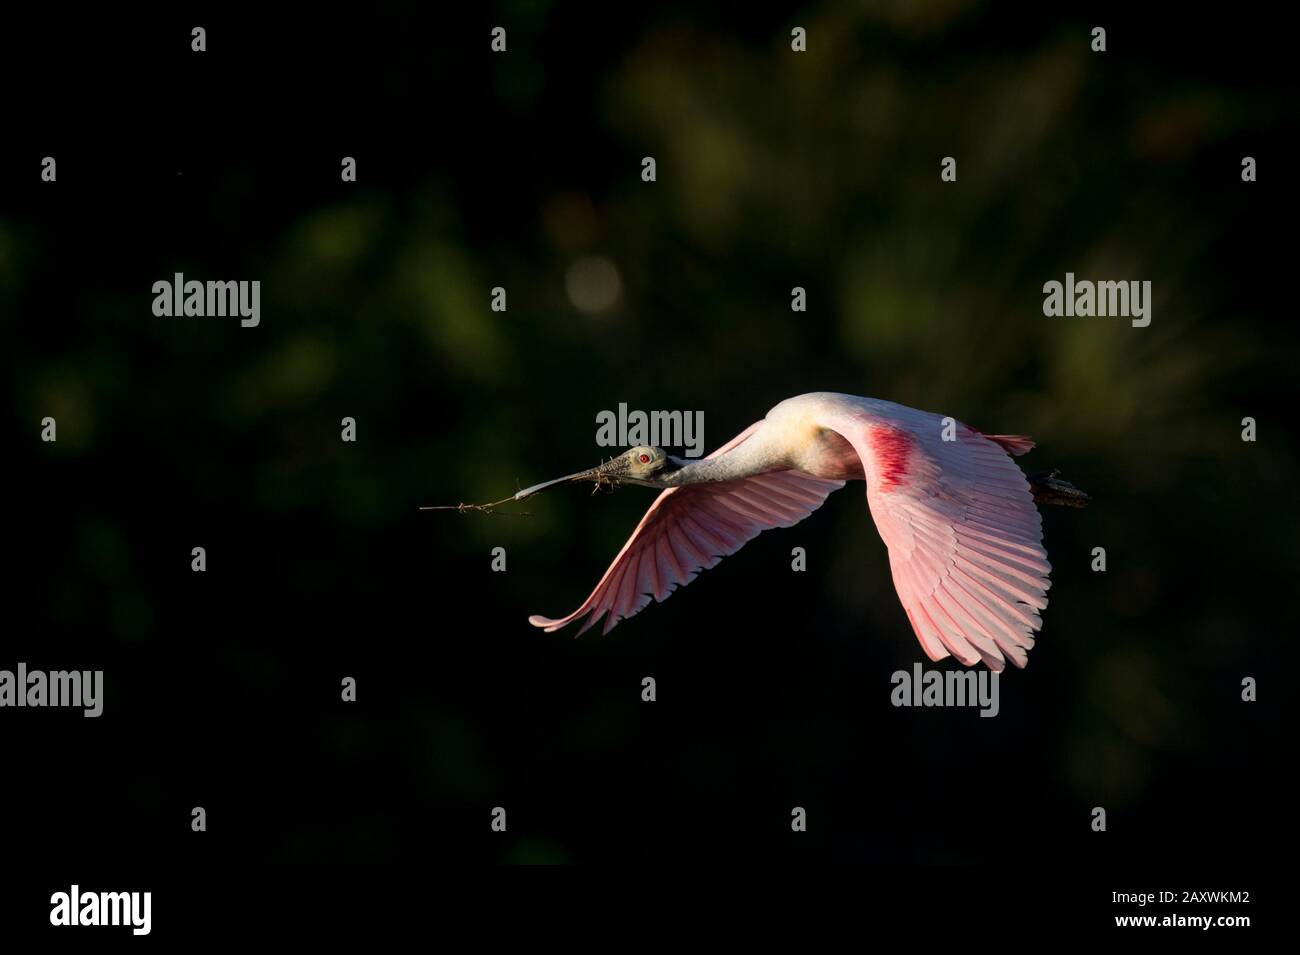 A Roseate Spoonbill flies in front of a dark black background with nesting material in its beak on a bright sunny day. Stock Photo